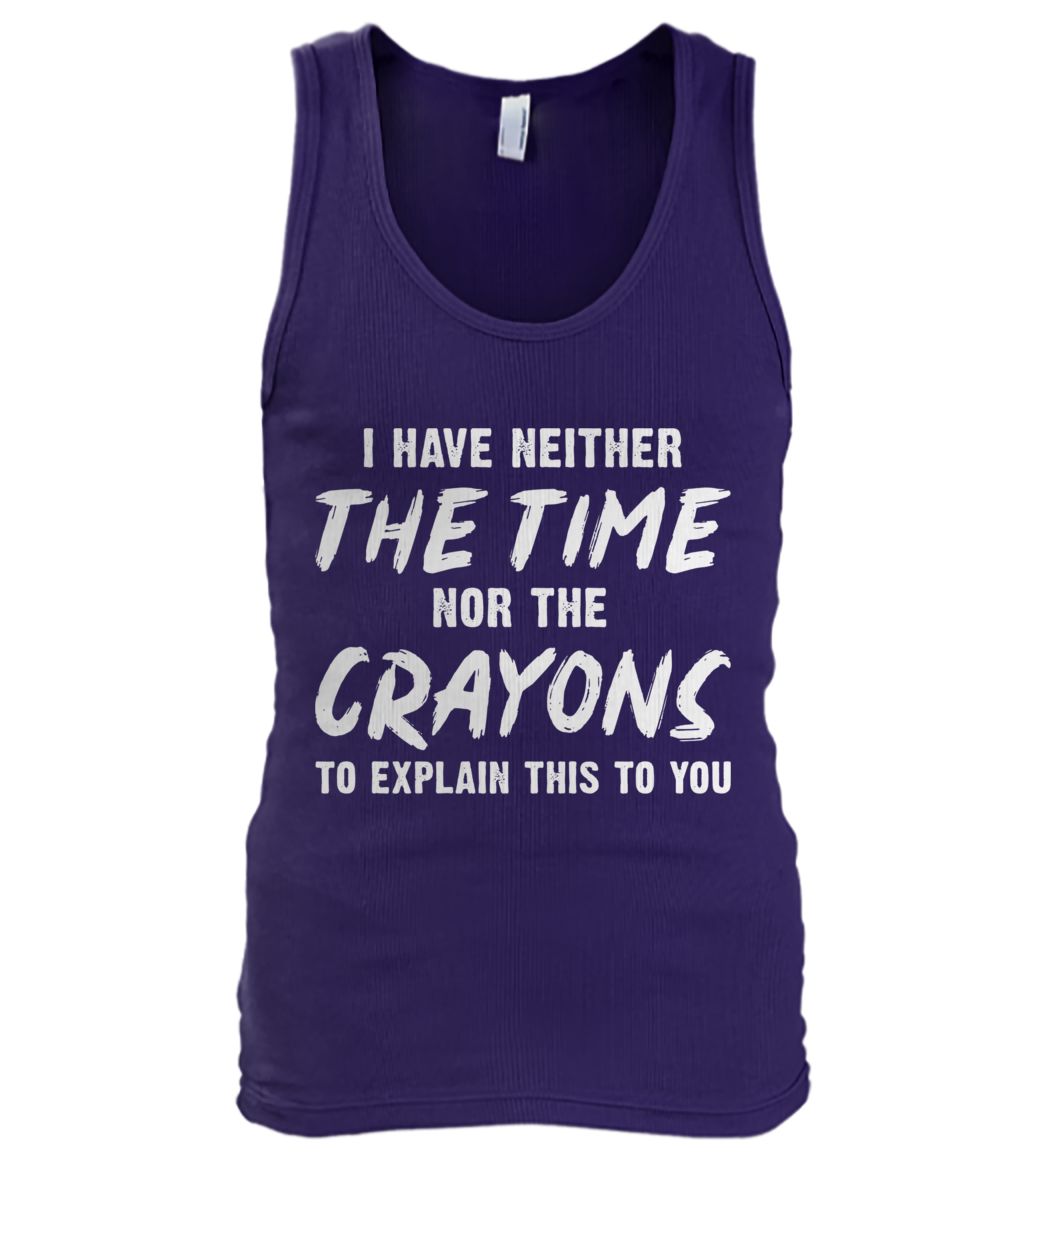 I have neither the time nor the crayons to explain this to you men's tank top